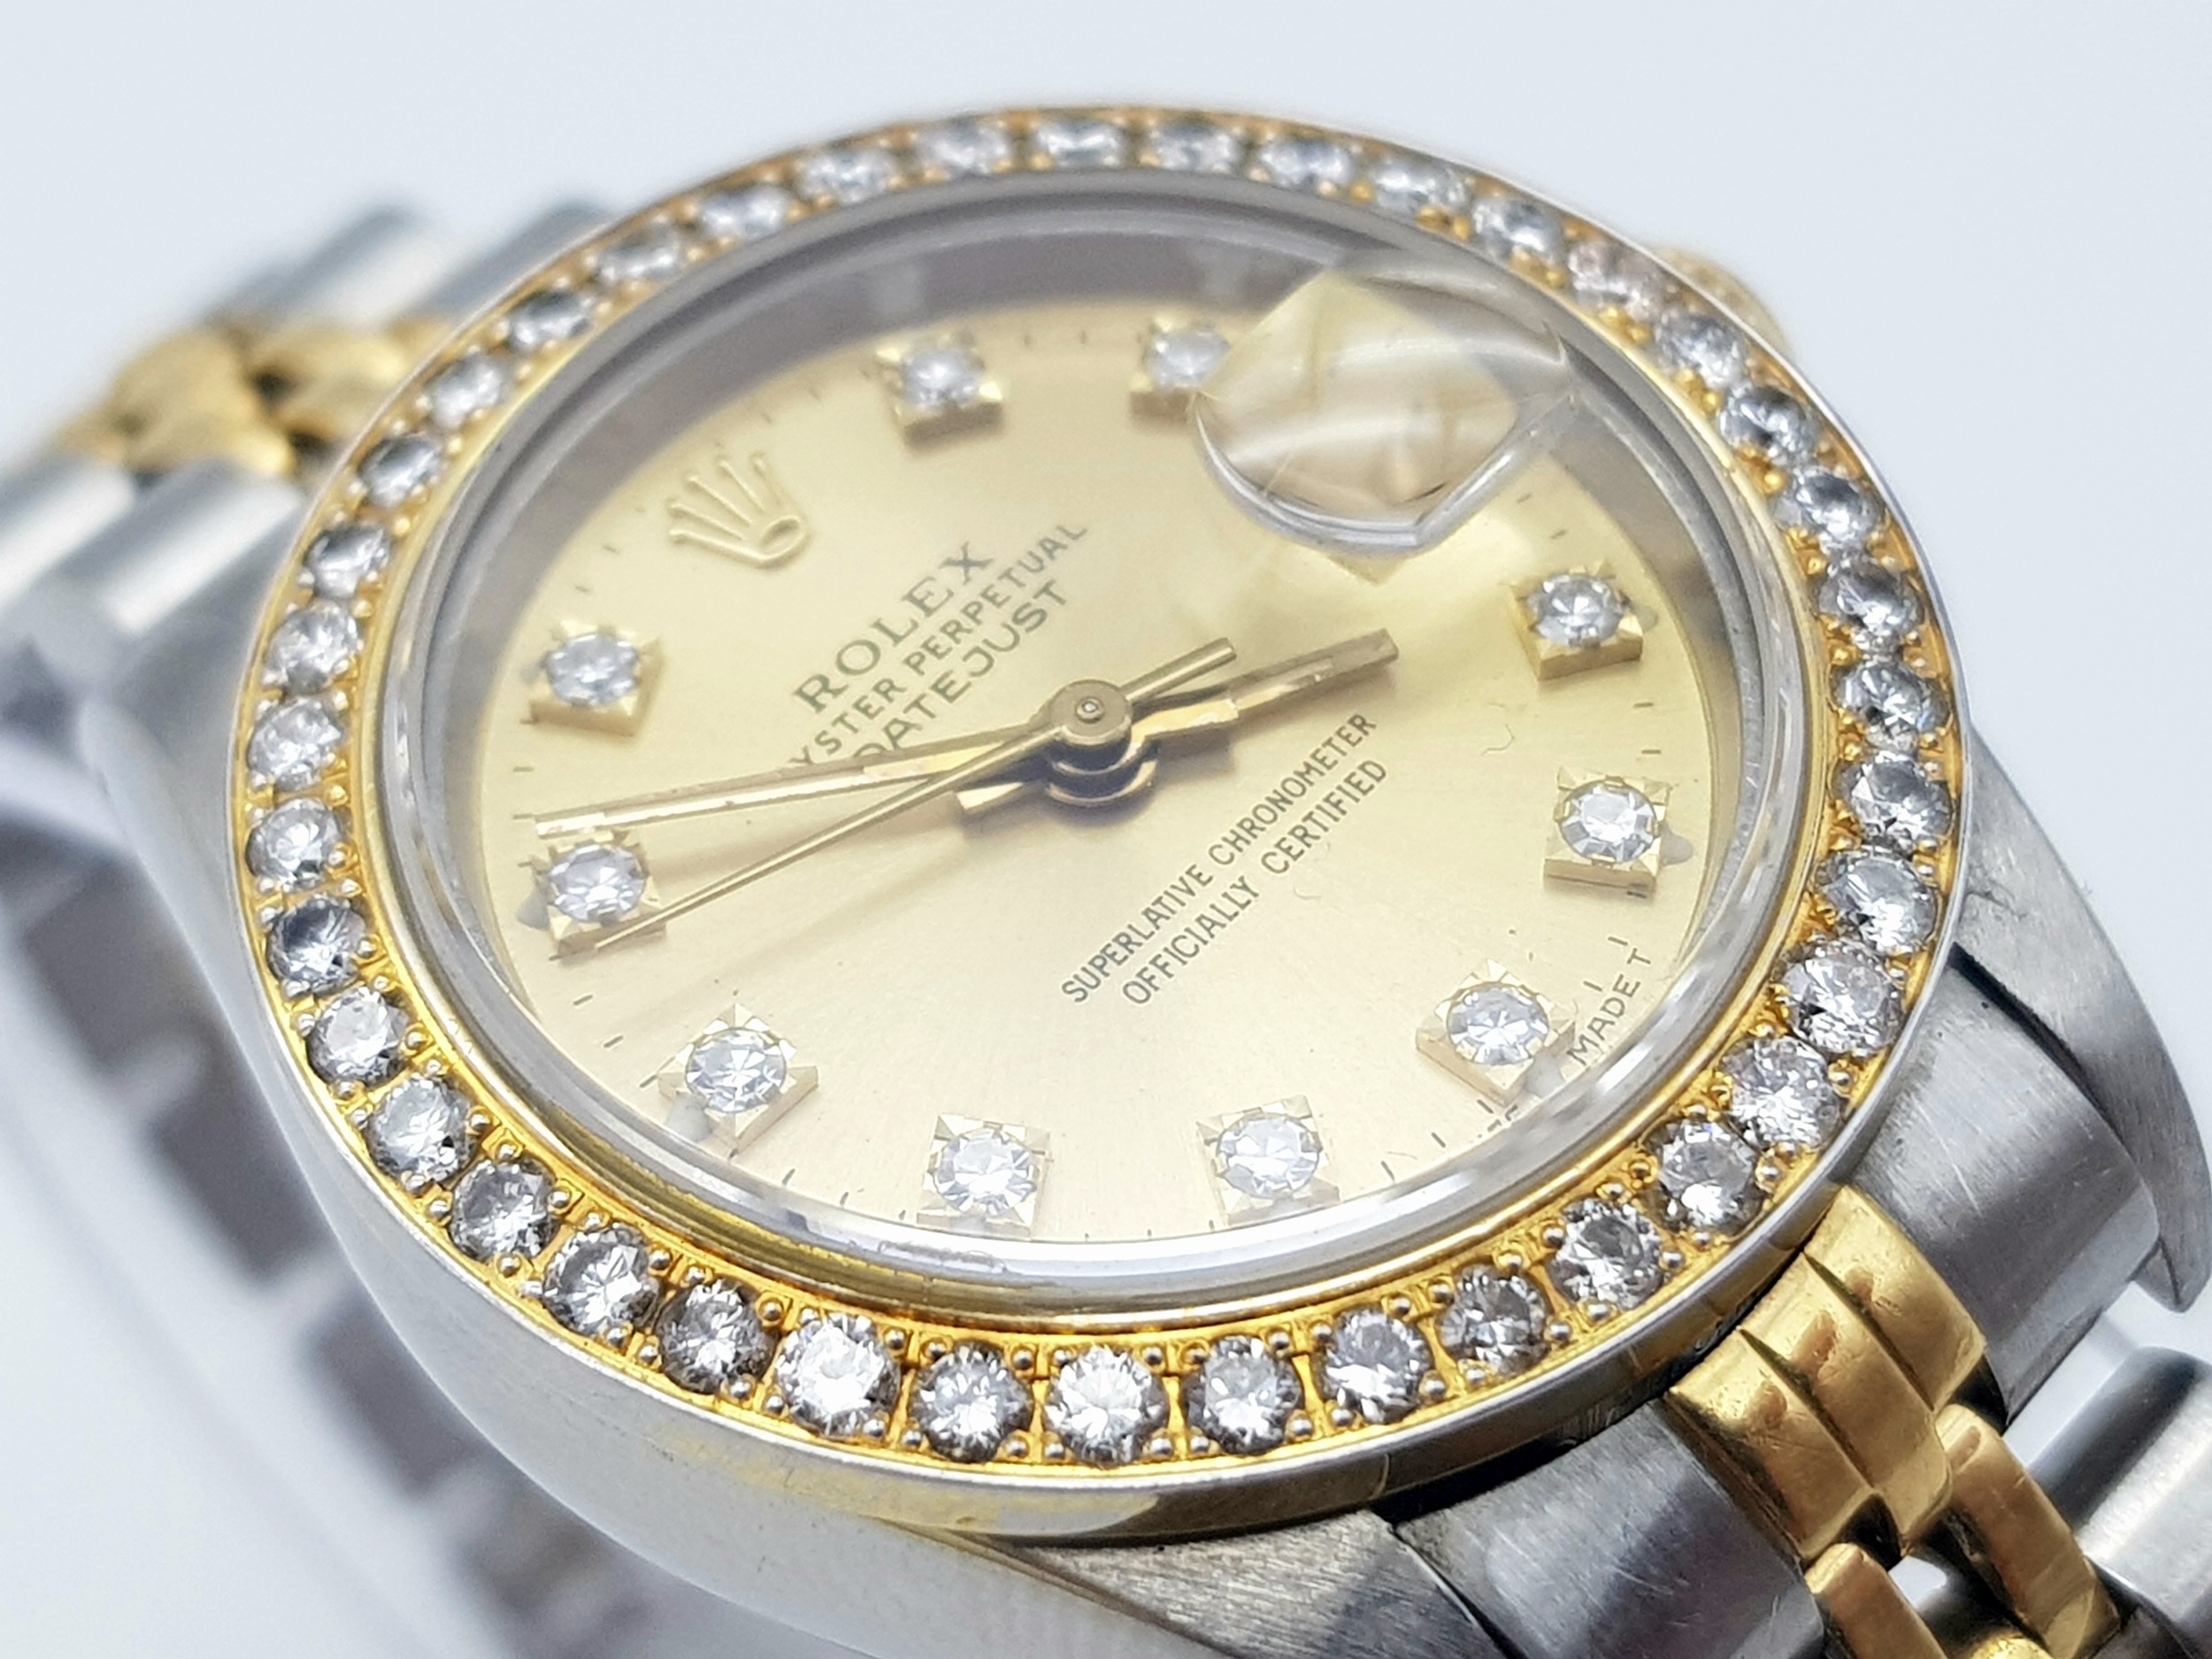 THE CLASSIC LADIES ROLEX BI-METAL OYSTER PERPETUAL DATEJUST WATCH IN VERY GOOD CONDITION HAVING A - Image 4 of 11